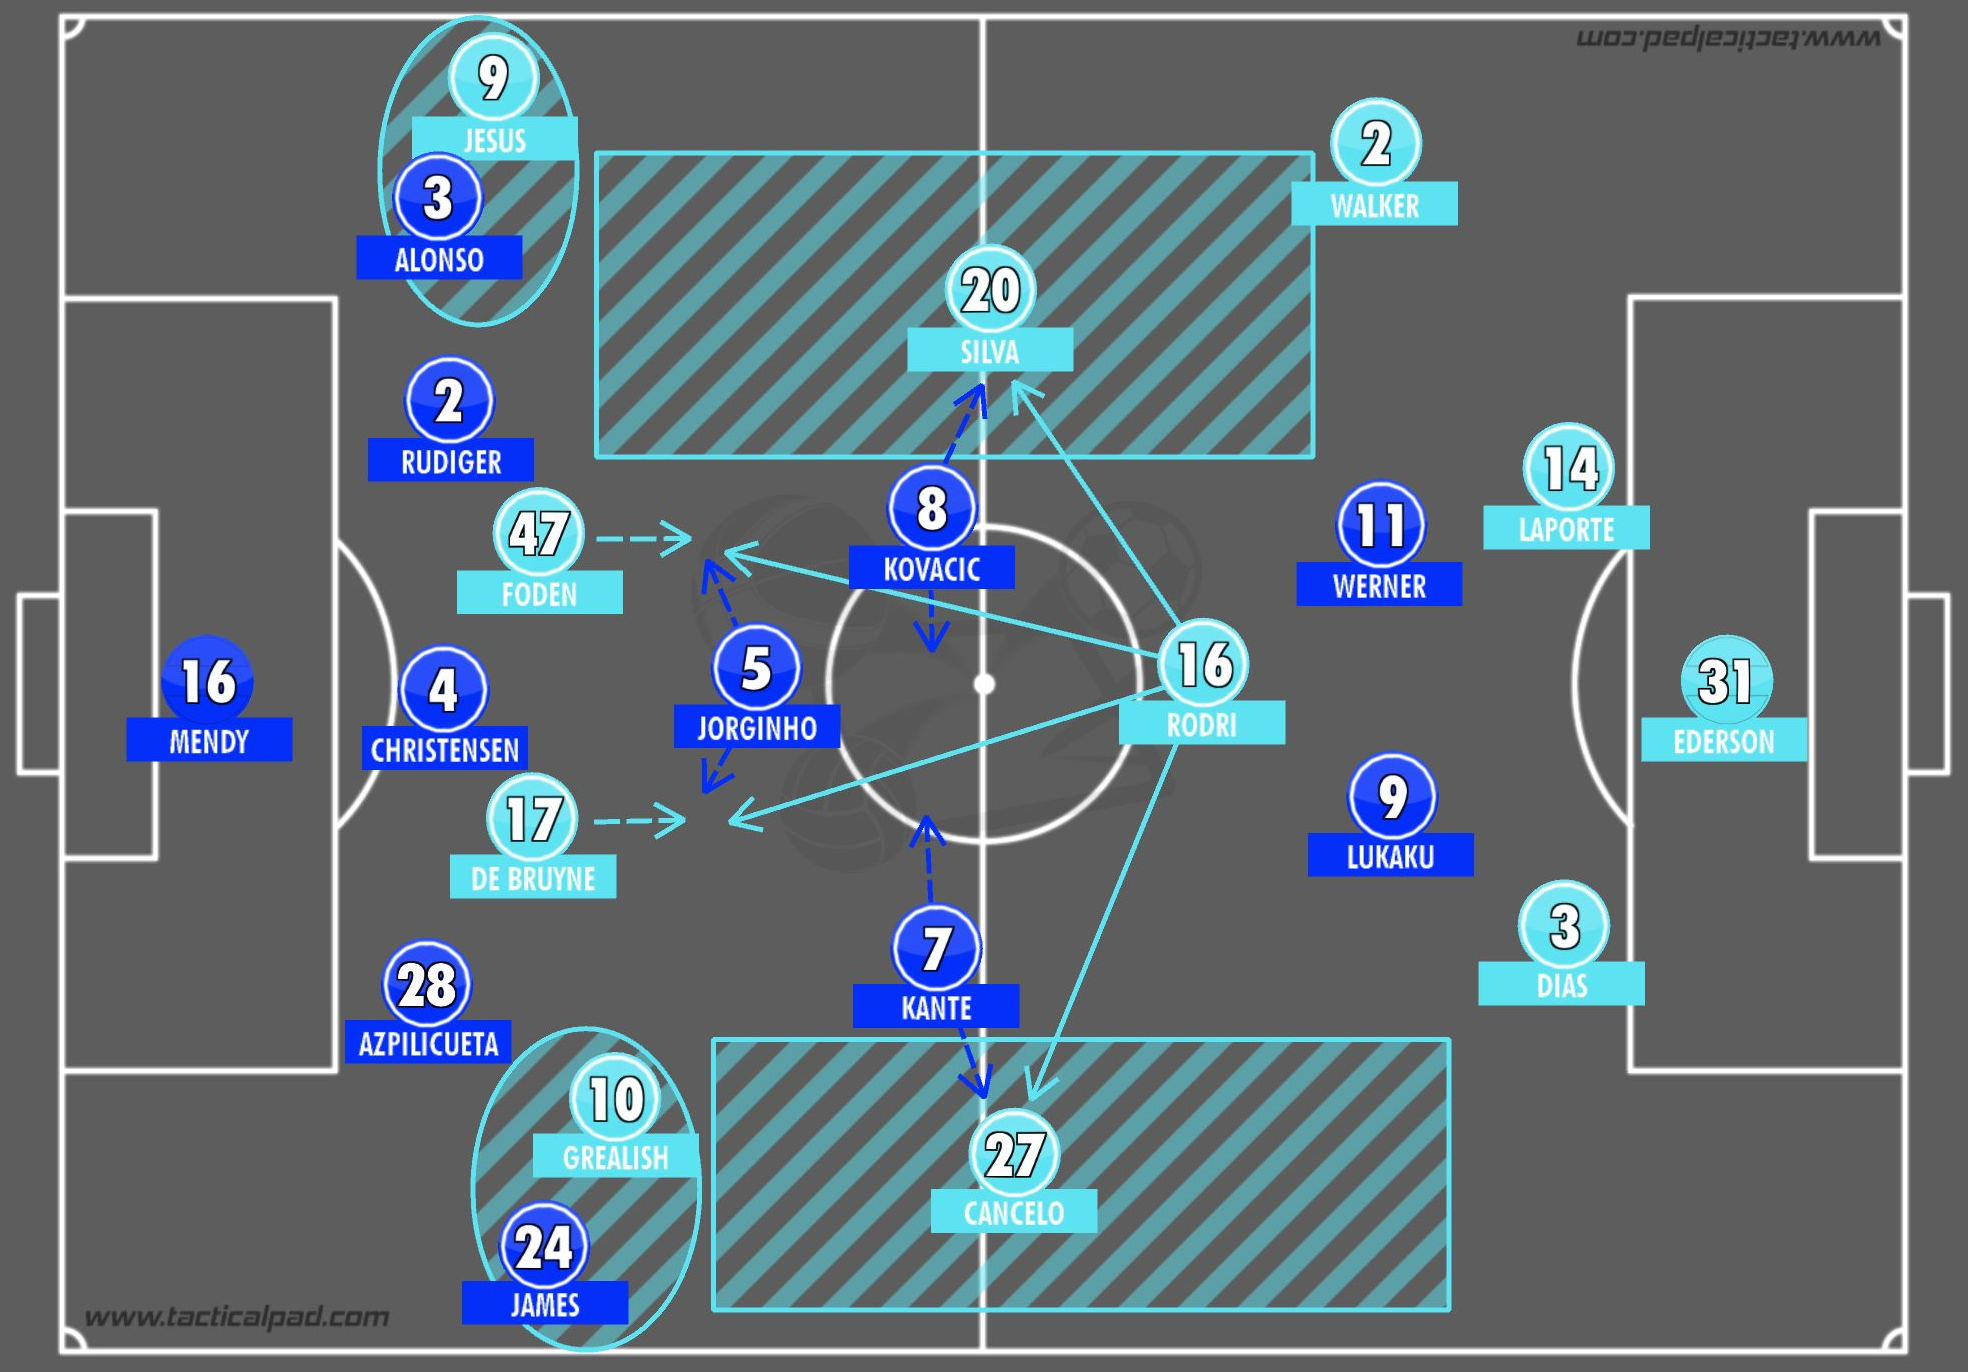 Chelsea lose at home against title rivals Man City - Tactical Analysis